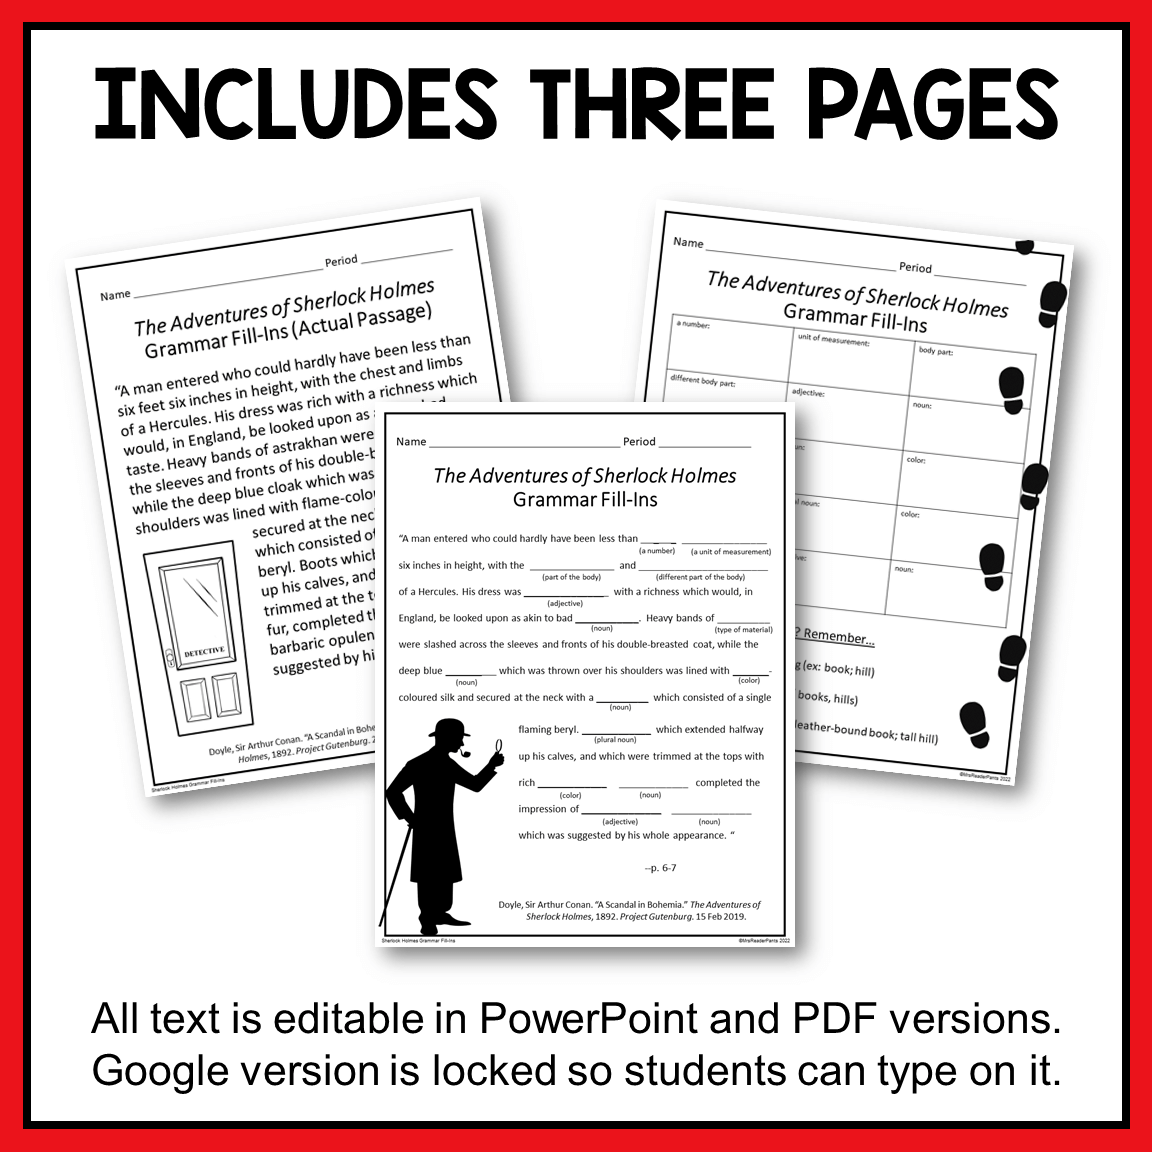 This Sherlock Holmes Grammar Activity includes 3 pages in three formats: PPT, PDF, and Google Slides. The PPT and PDF versions have editable text.